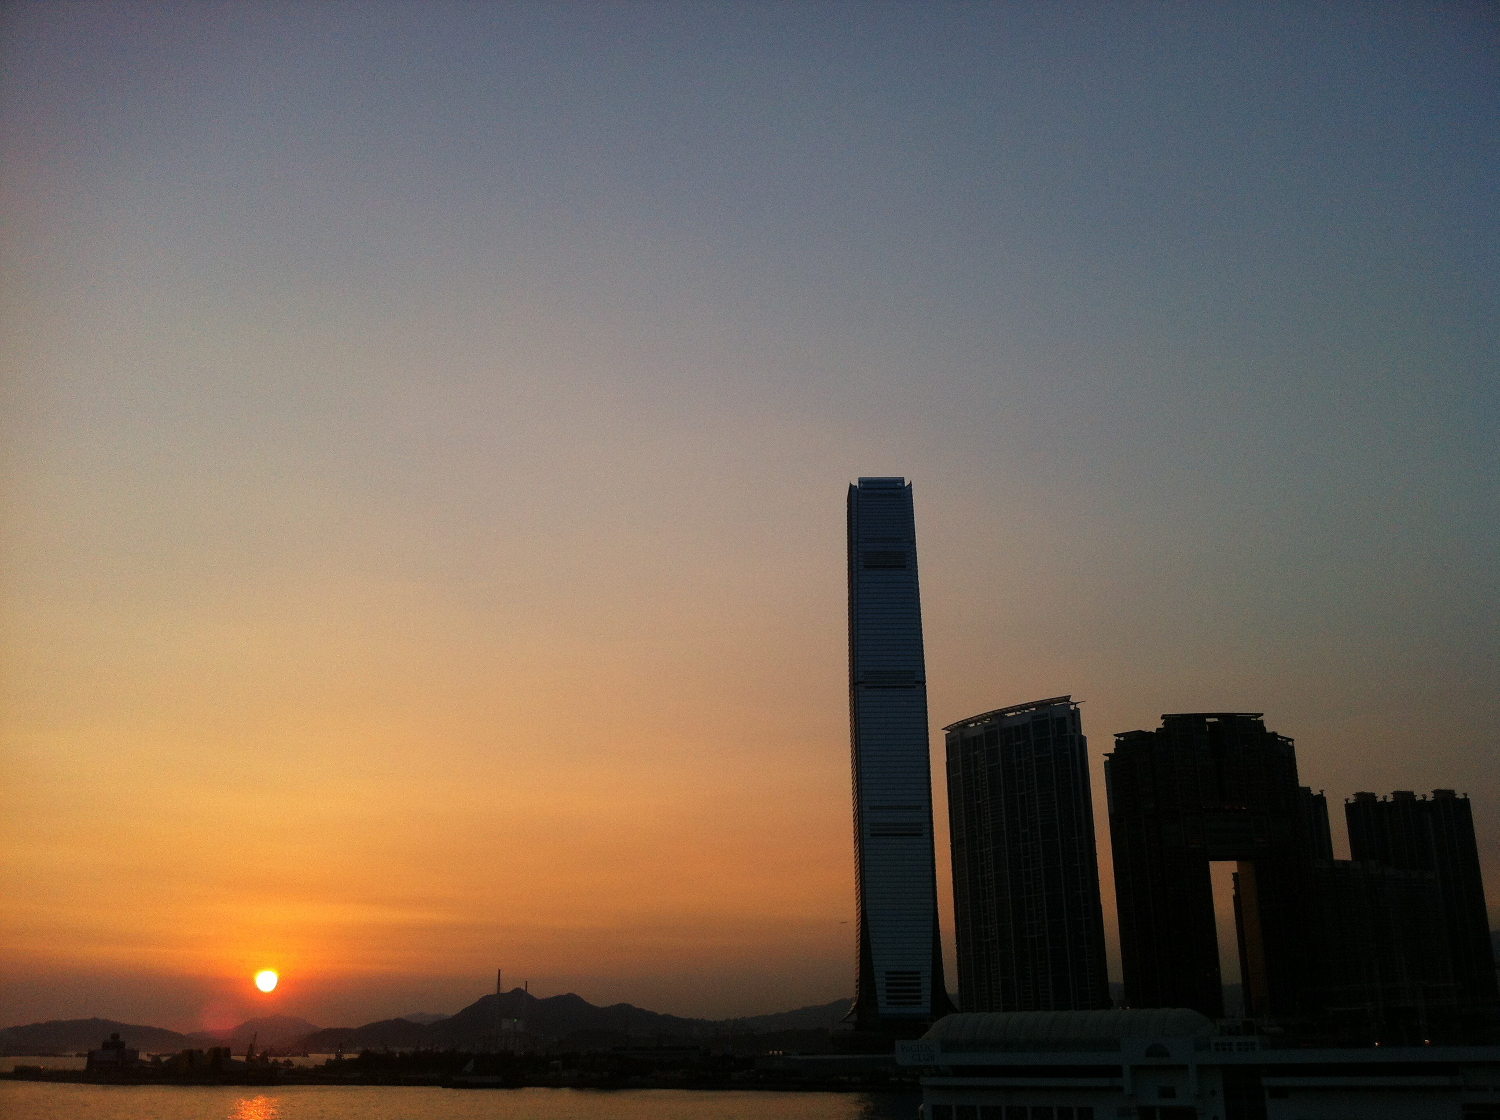 Sunset over the Harbour City car park. Image by Piera Chen / londoninfopage